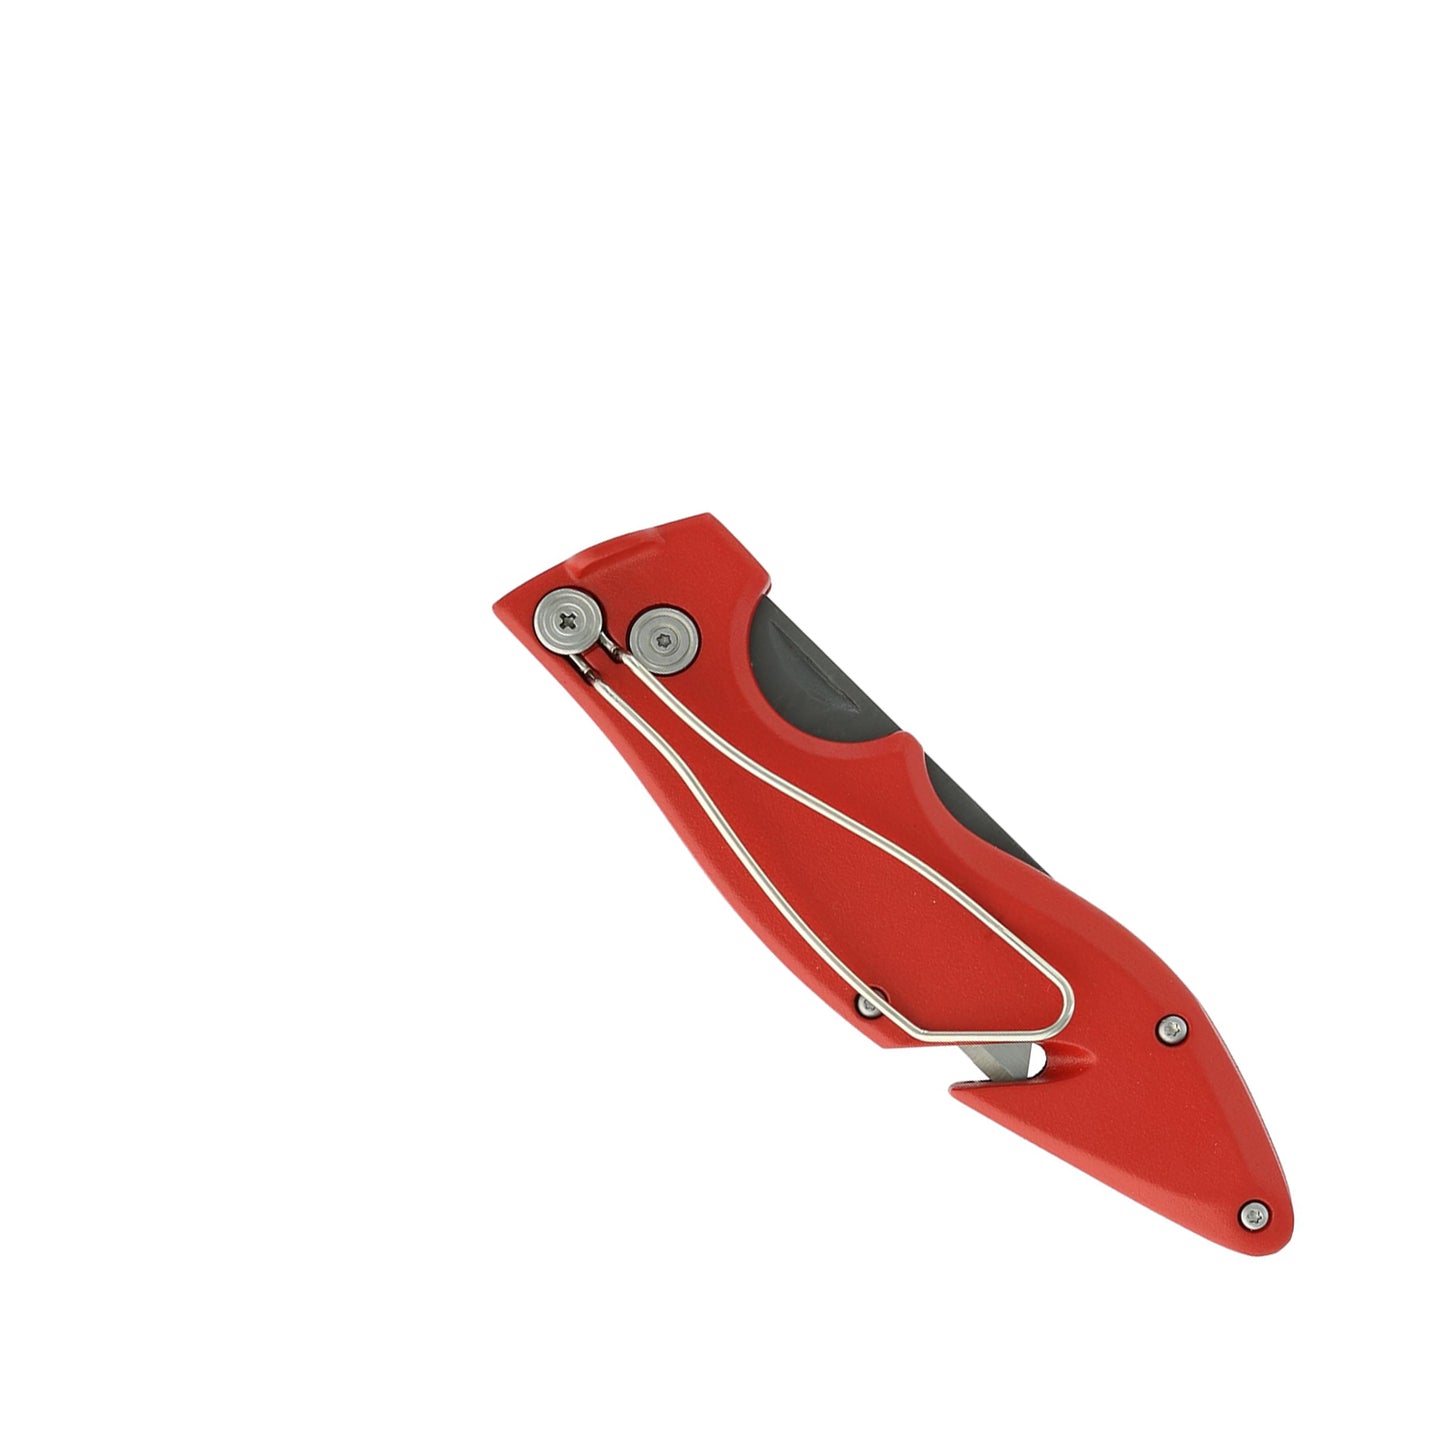 48-22-1901 - Fastback Utility Knife with Wire Stripper / Gut Hook